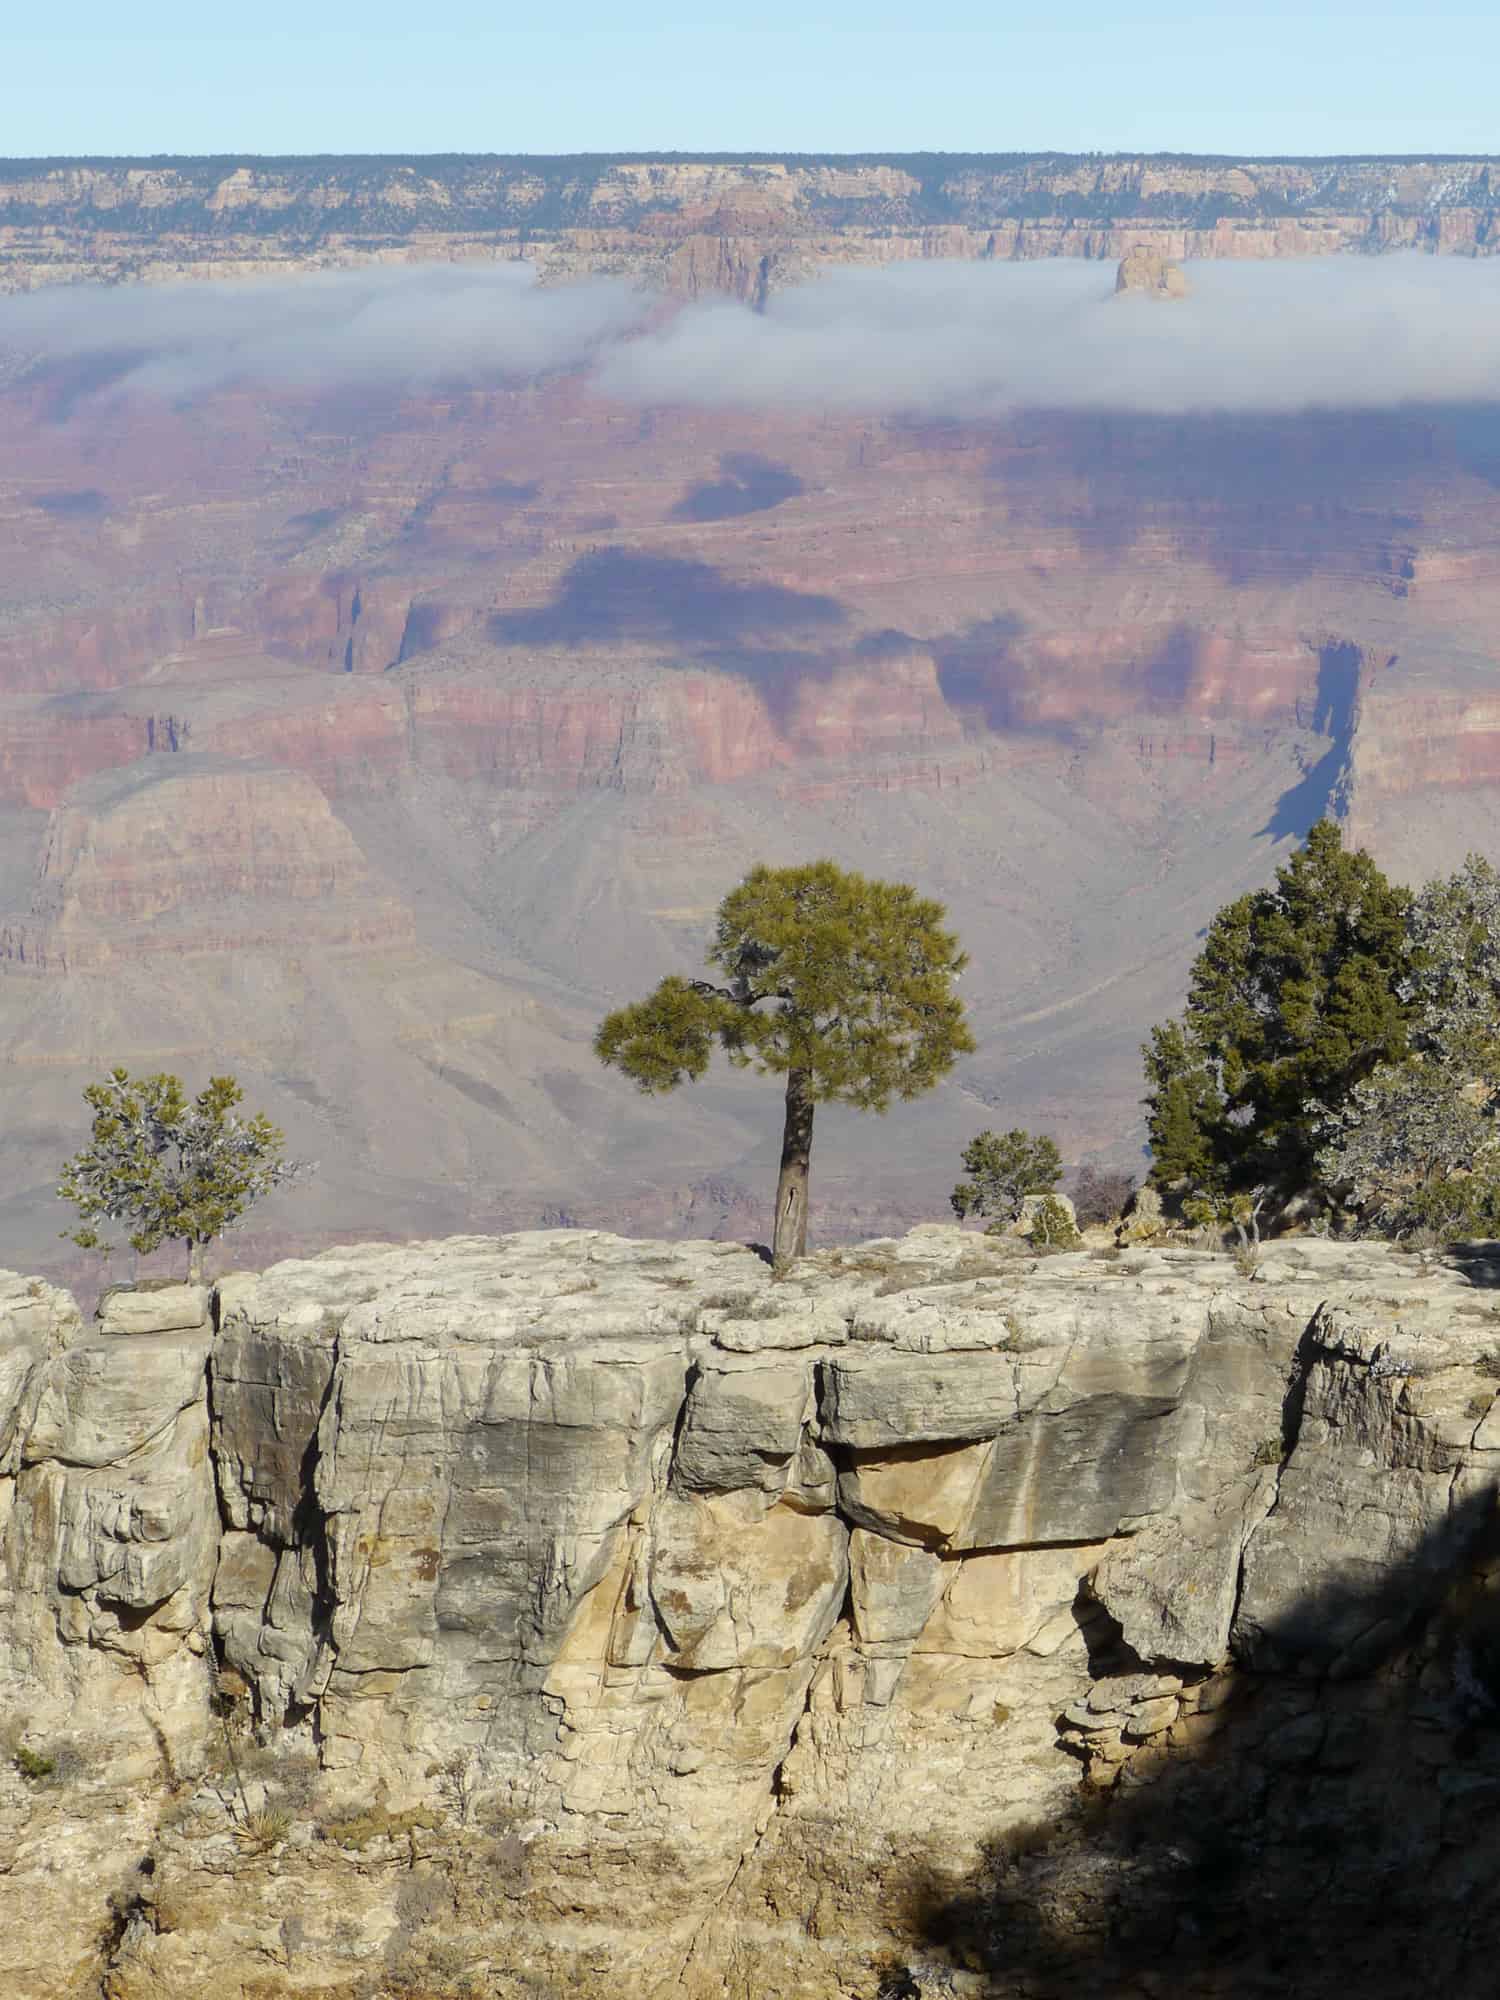 the grand canyon is one of the national parks near st. george, utah - a tree stands along a cliff edge along the grand canyon rim